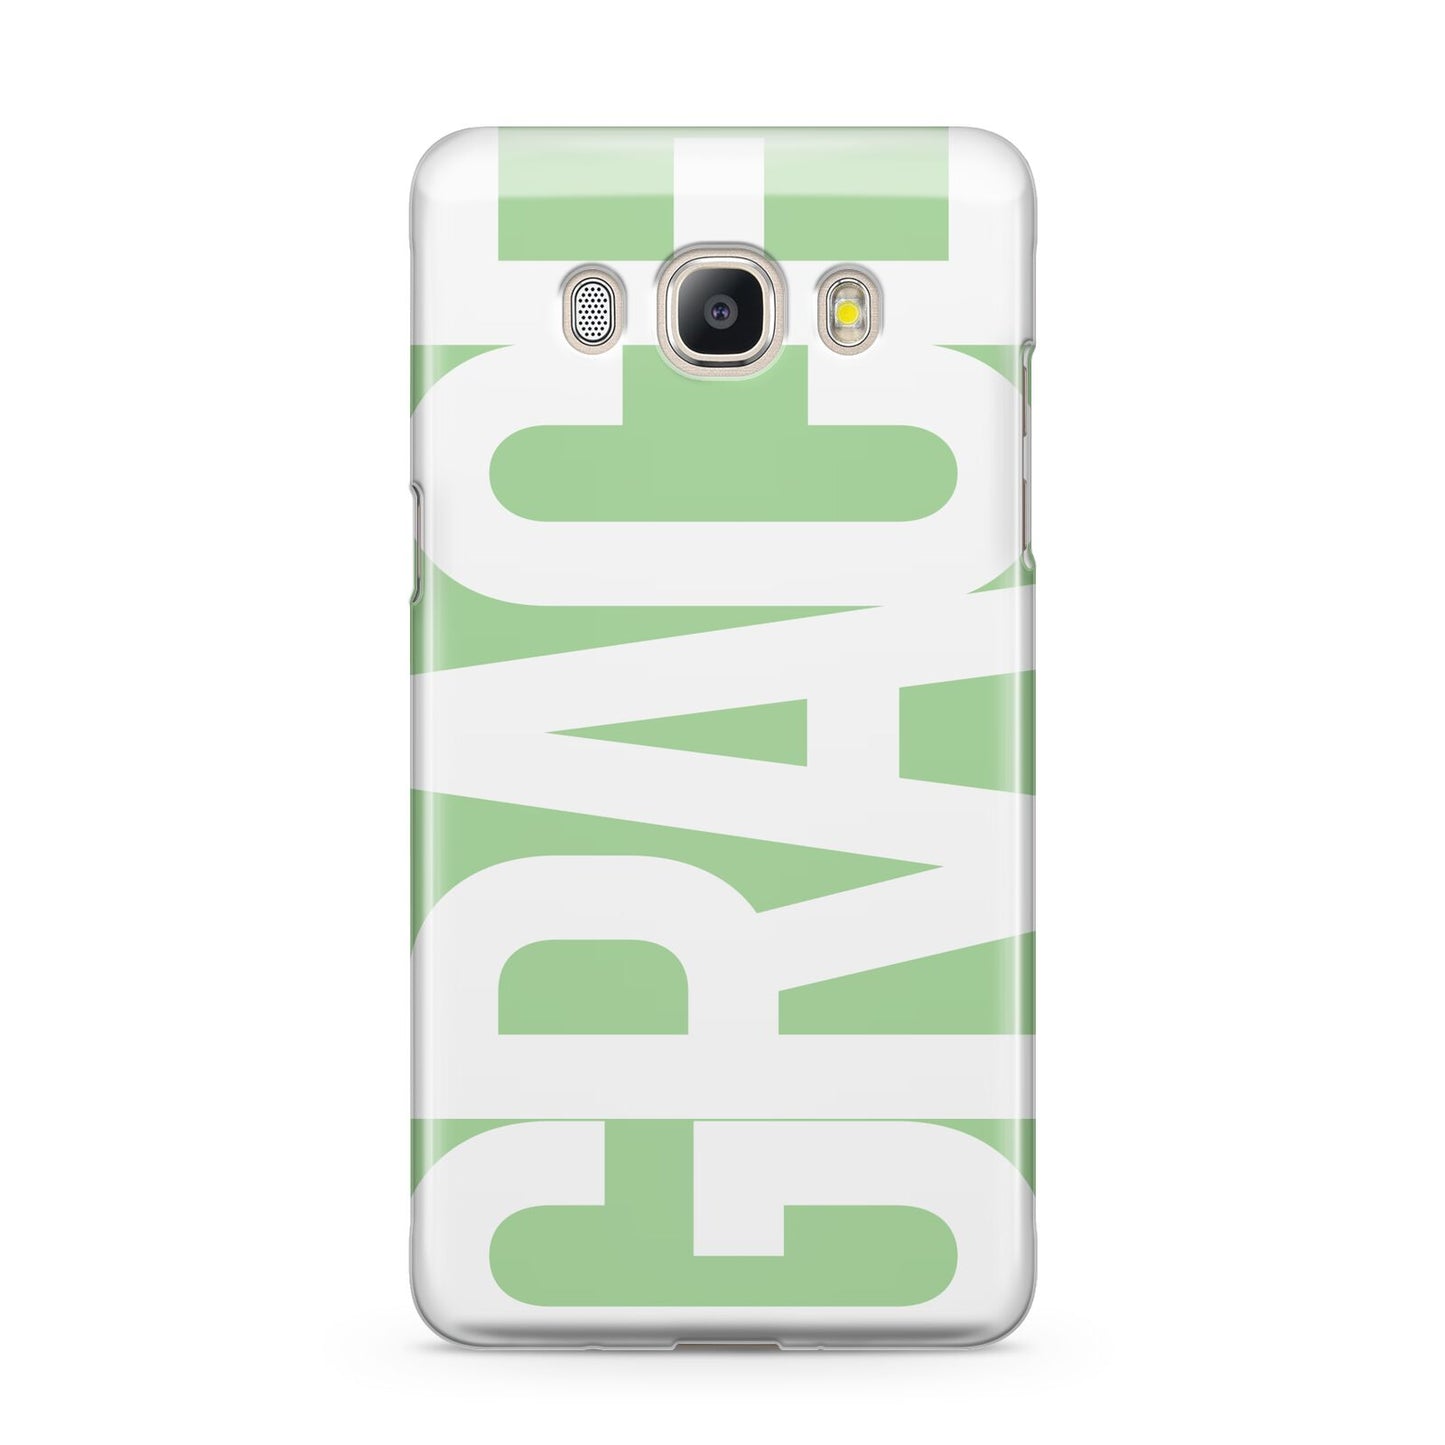 Pale Green with Bold White Text Samsung Galaxy J5 2016 Case